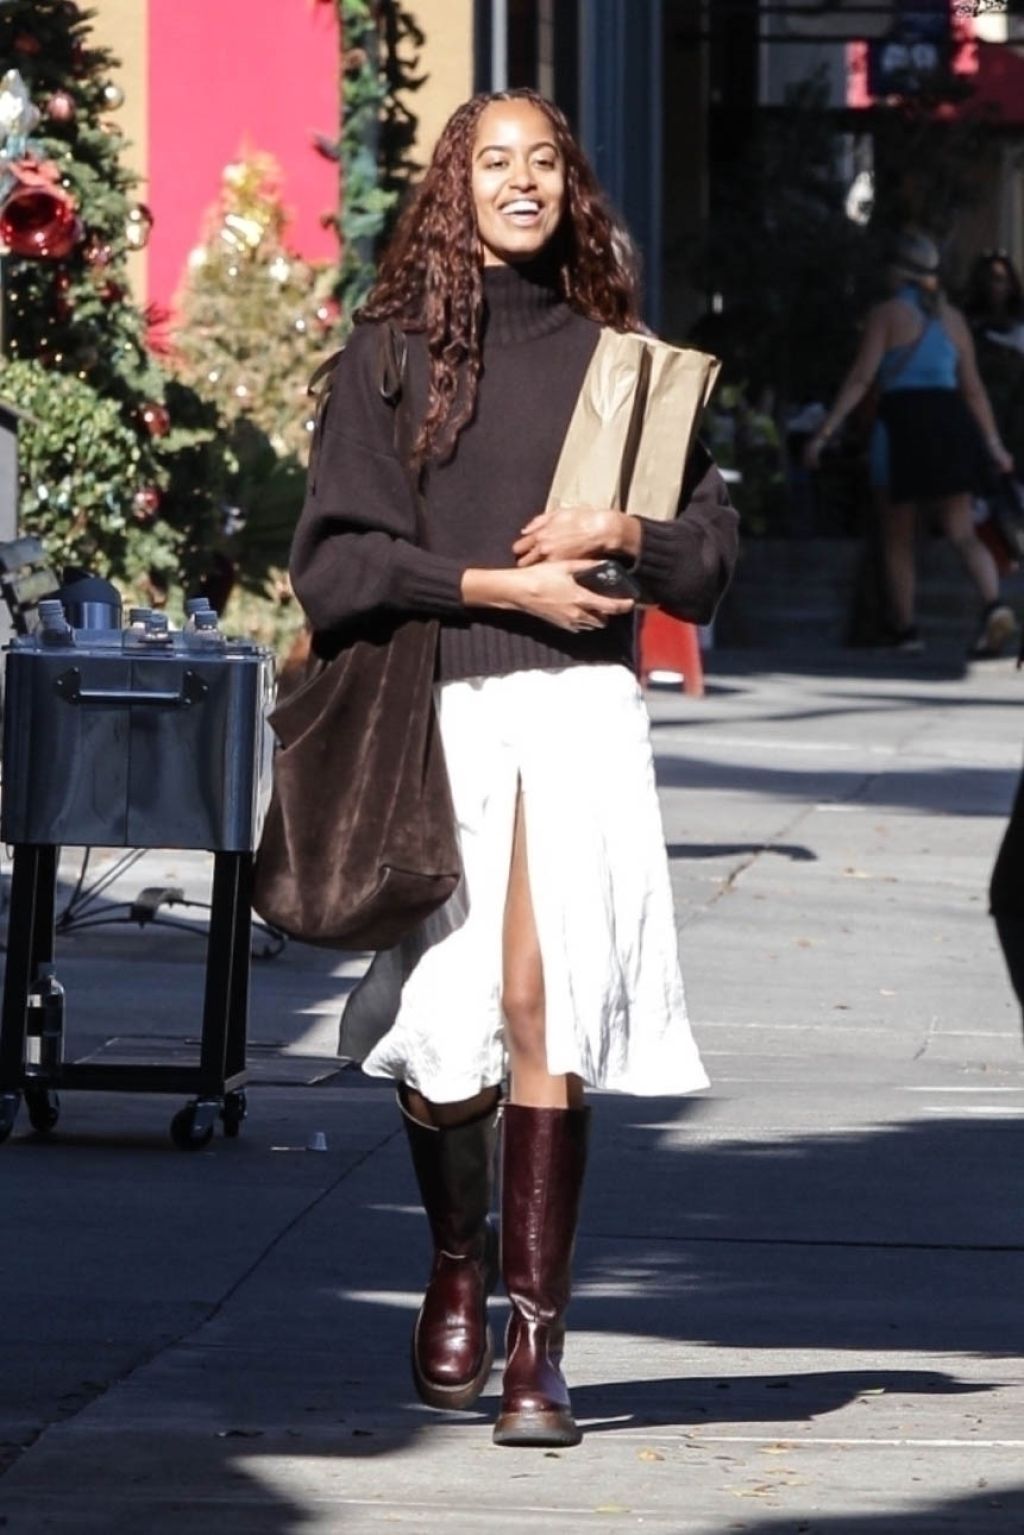 Malia Obama Stylish Brown Sweater and Boots Ensemble in Los Angeles